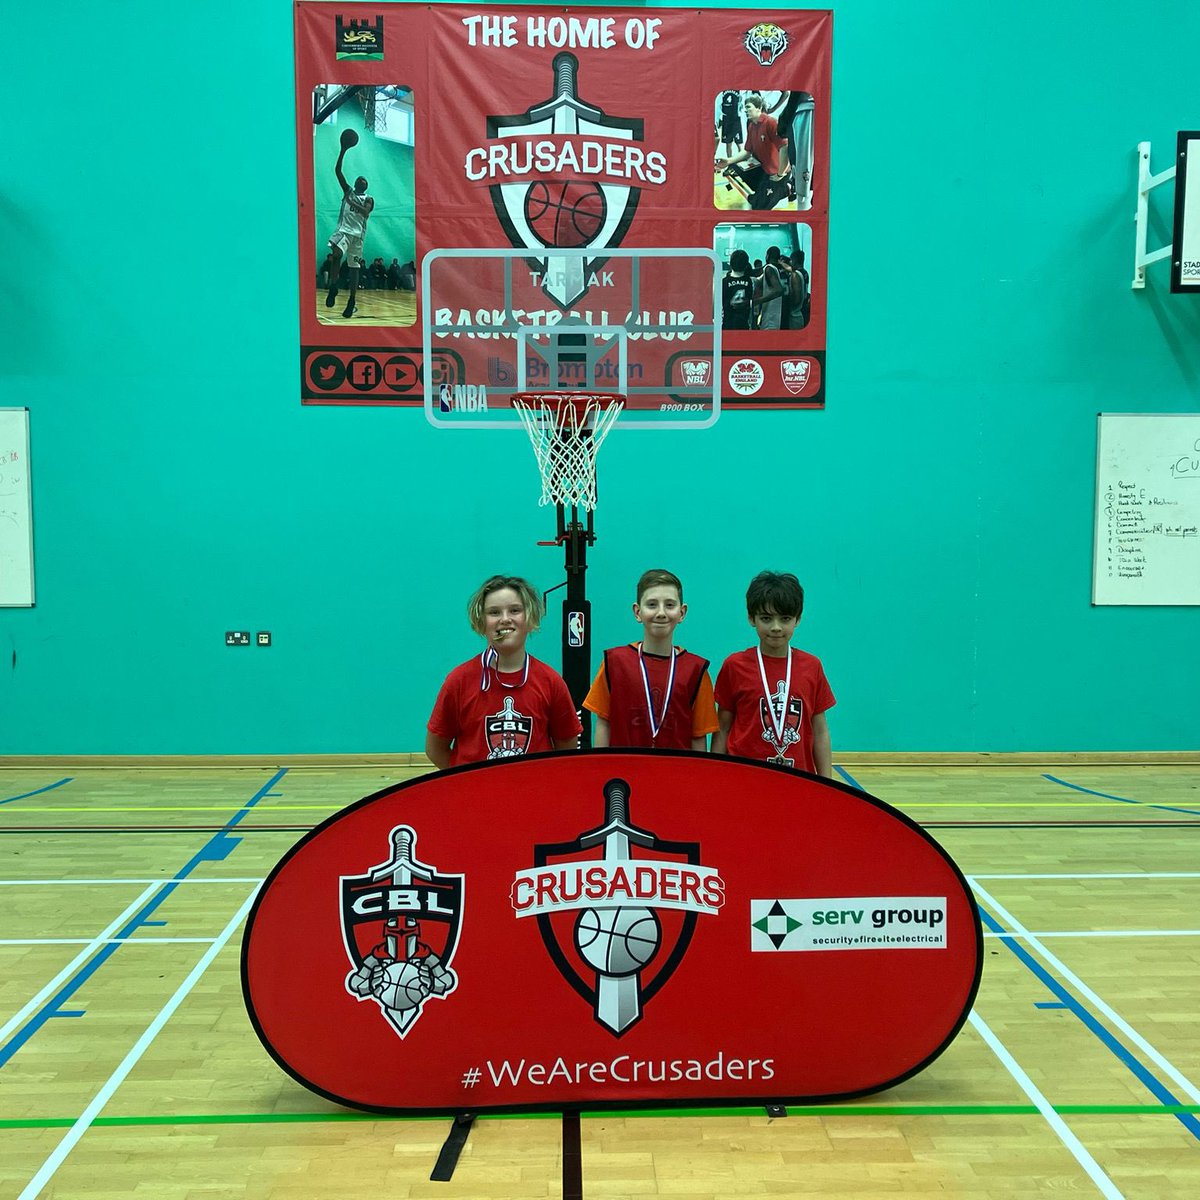 🥇U10 CBL WINNERS-TEAM 🔴 After 10 fantastic weeks of basketball the red team comes out on top. It’s been great to see all the young ballers get better each week improving their skills & game play. 🔗 Sign up for the new season starting on 16th April here: club.spond.com/landing/course…